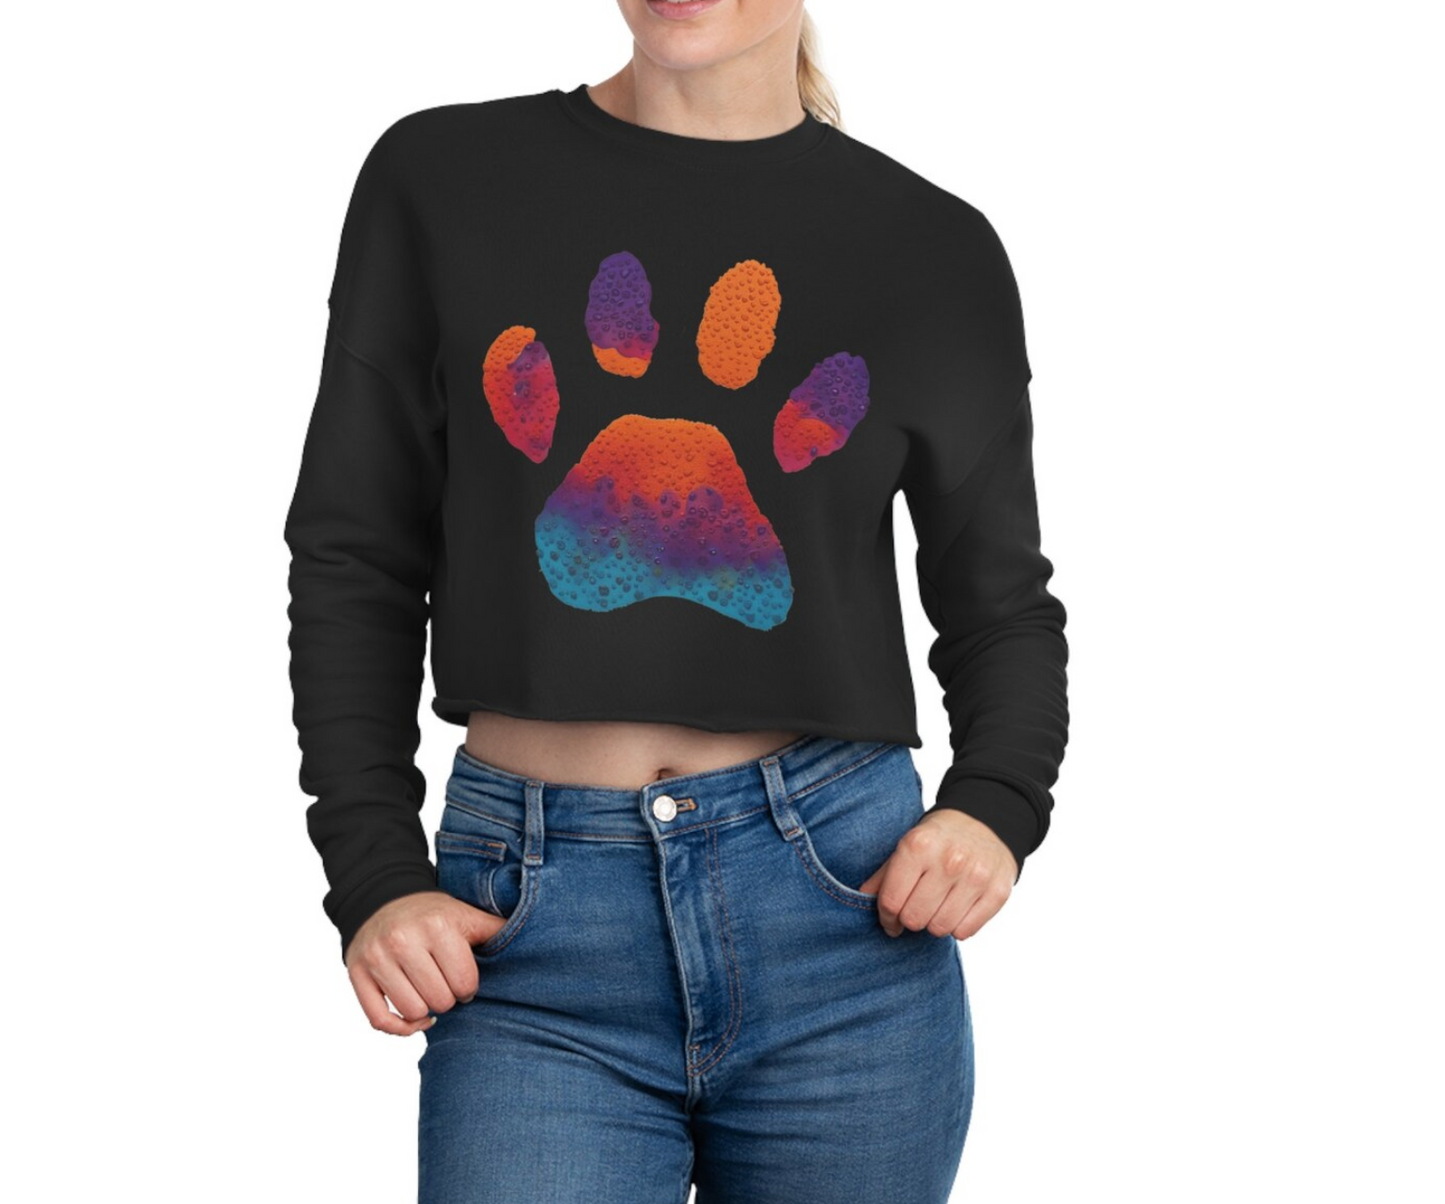 Stylish Paw Print Black Cropped Sweater for Women